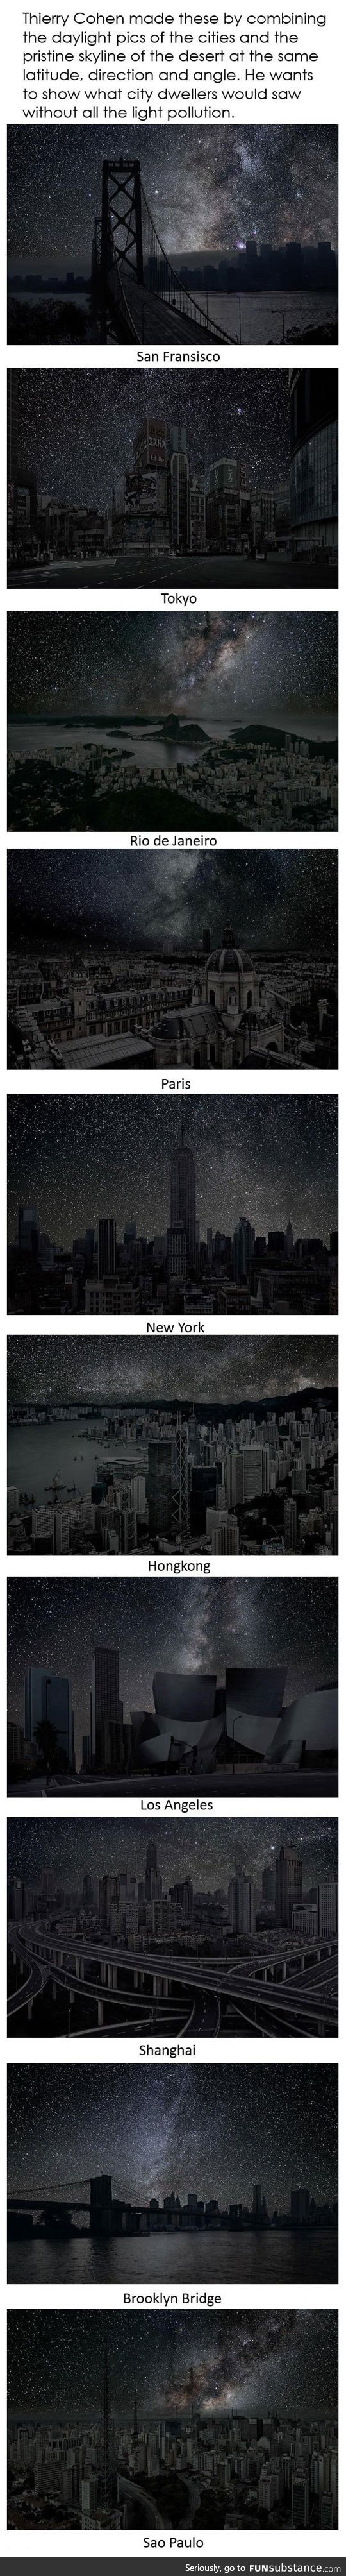 Pure night skylines of famous cities